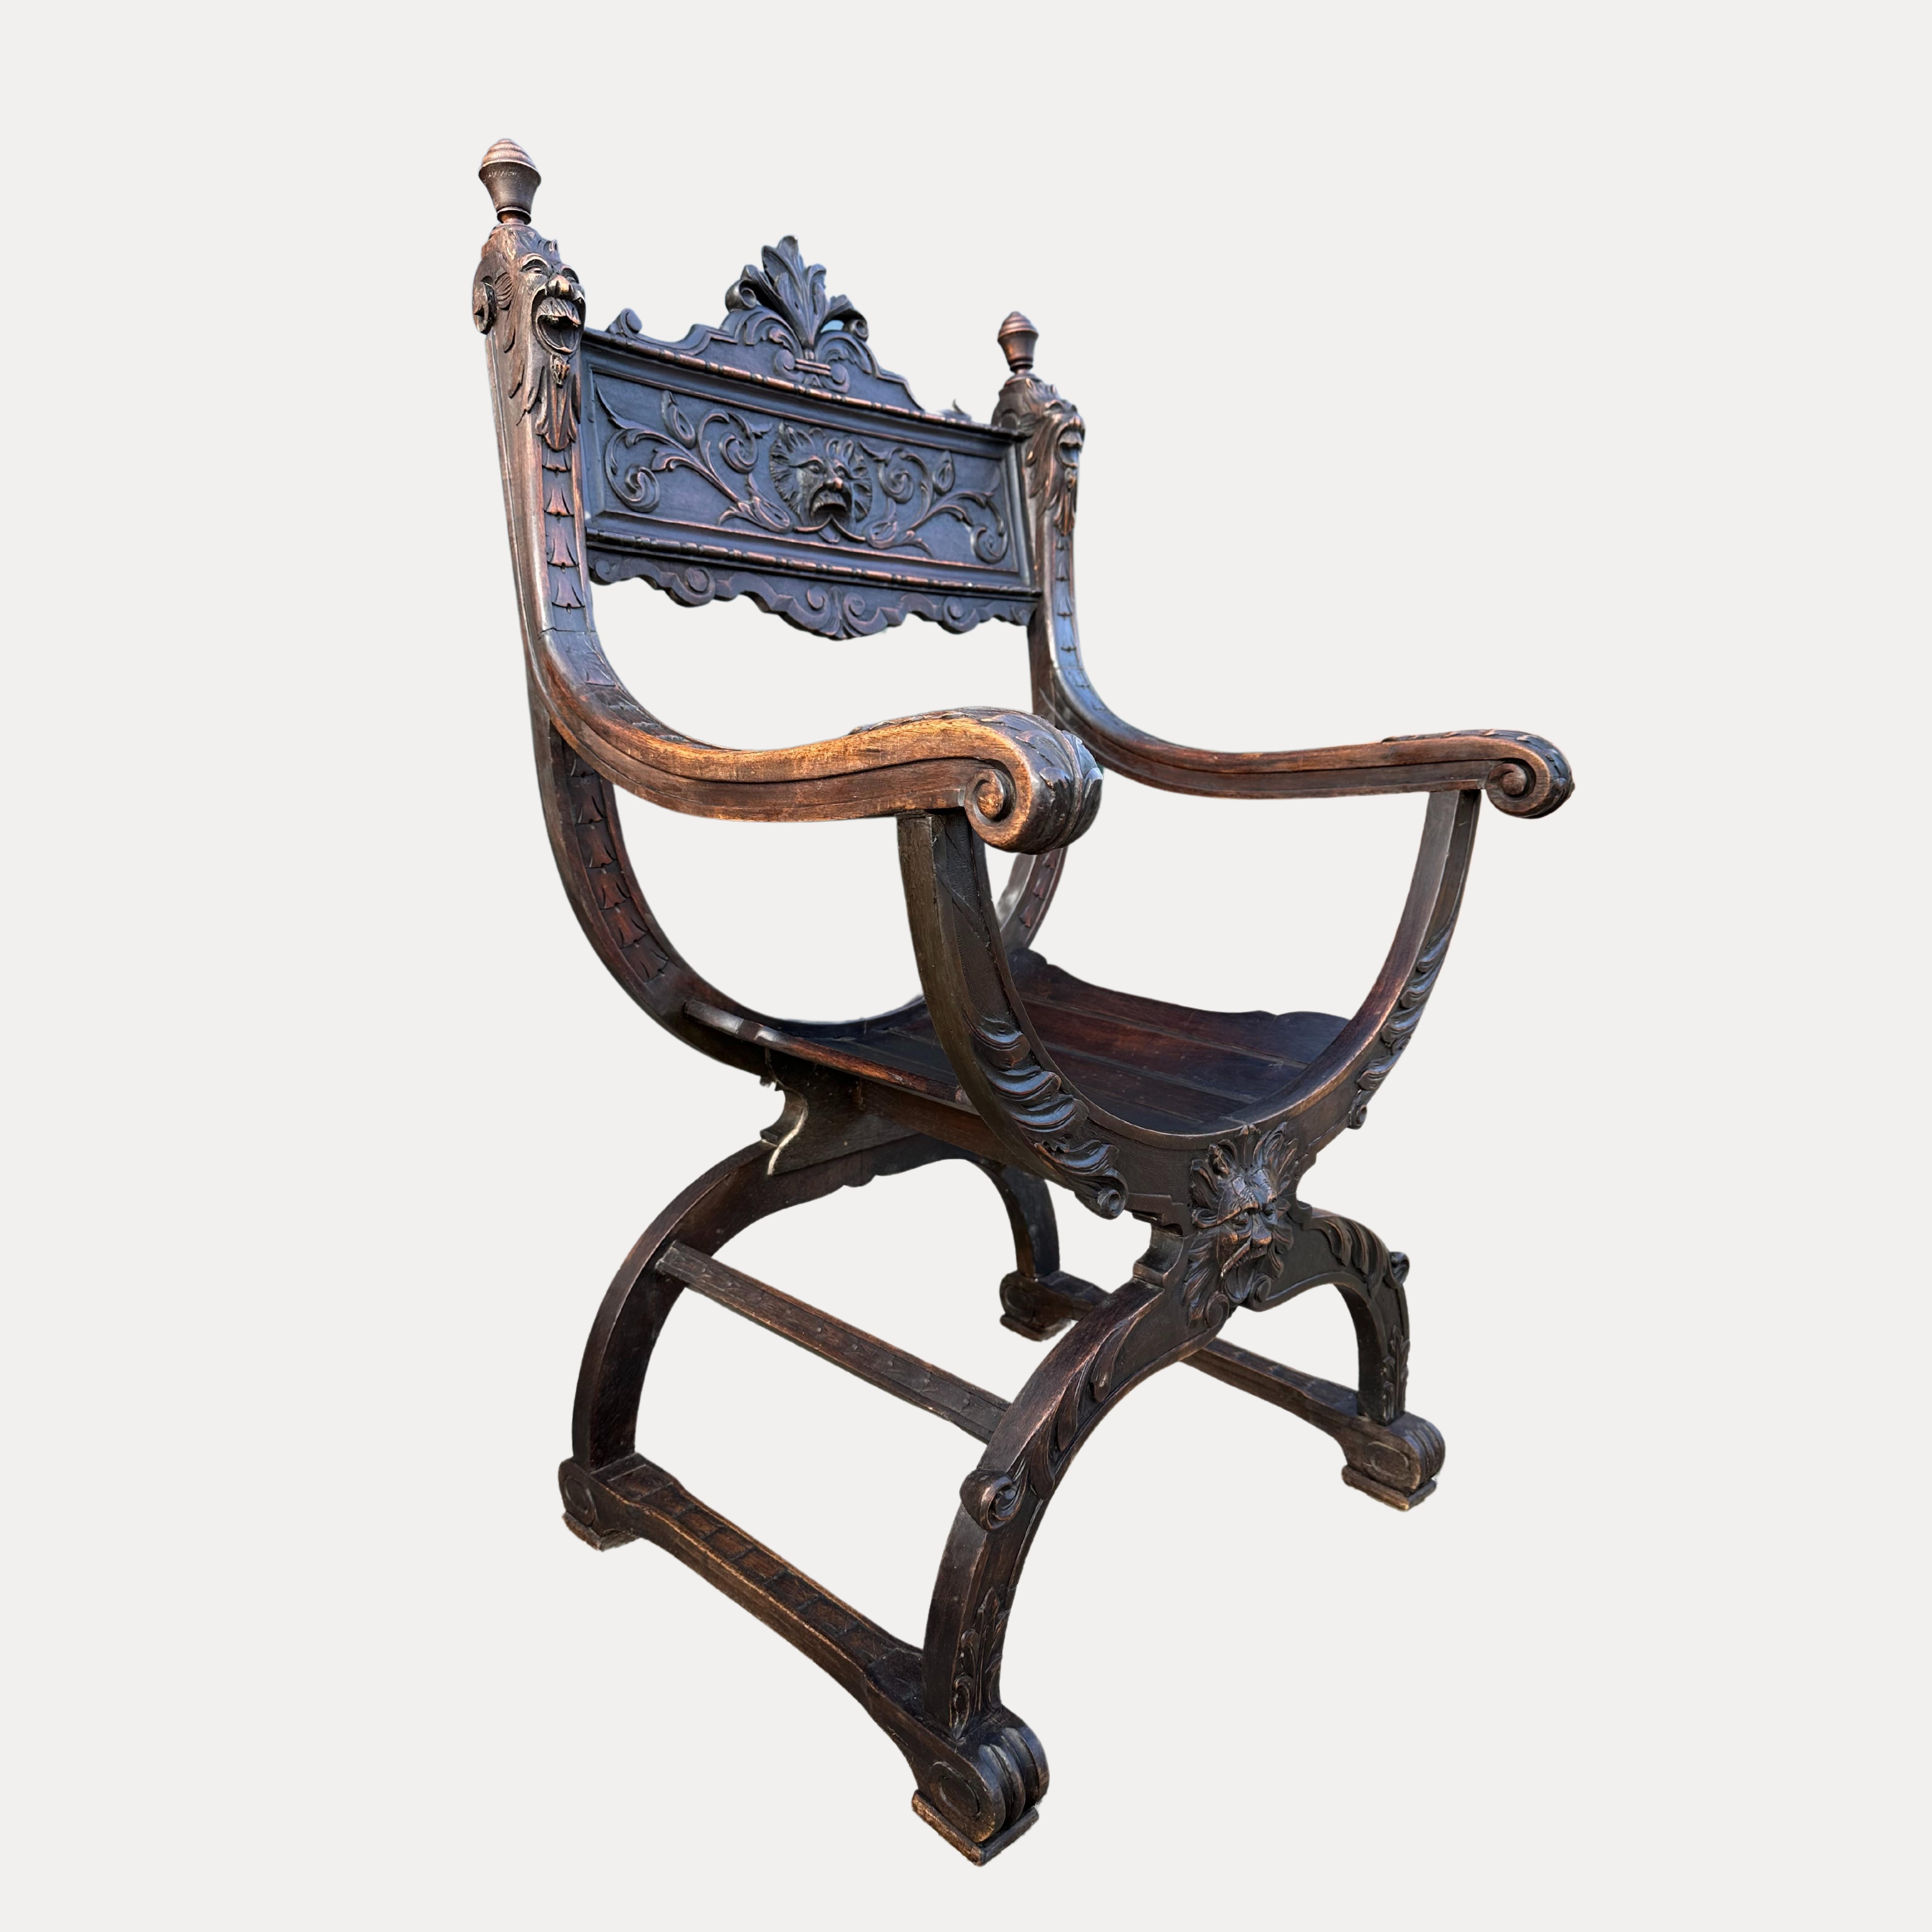 Magnificent 19th century Renaissance Revival Curule/Savonarola chair originating from Italy circa 1880.
Highly desirable carvings depicting the Face of the North Wind.
This beautiful chair has heads and faces intricately carved on the chair